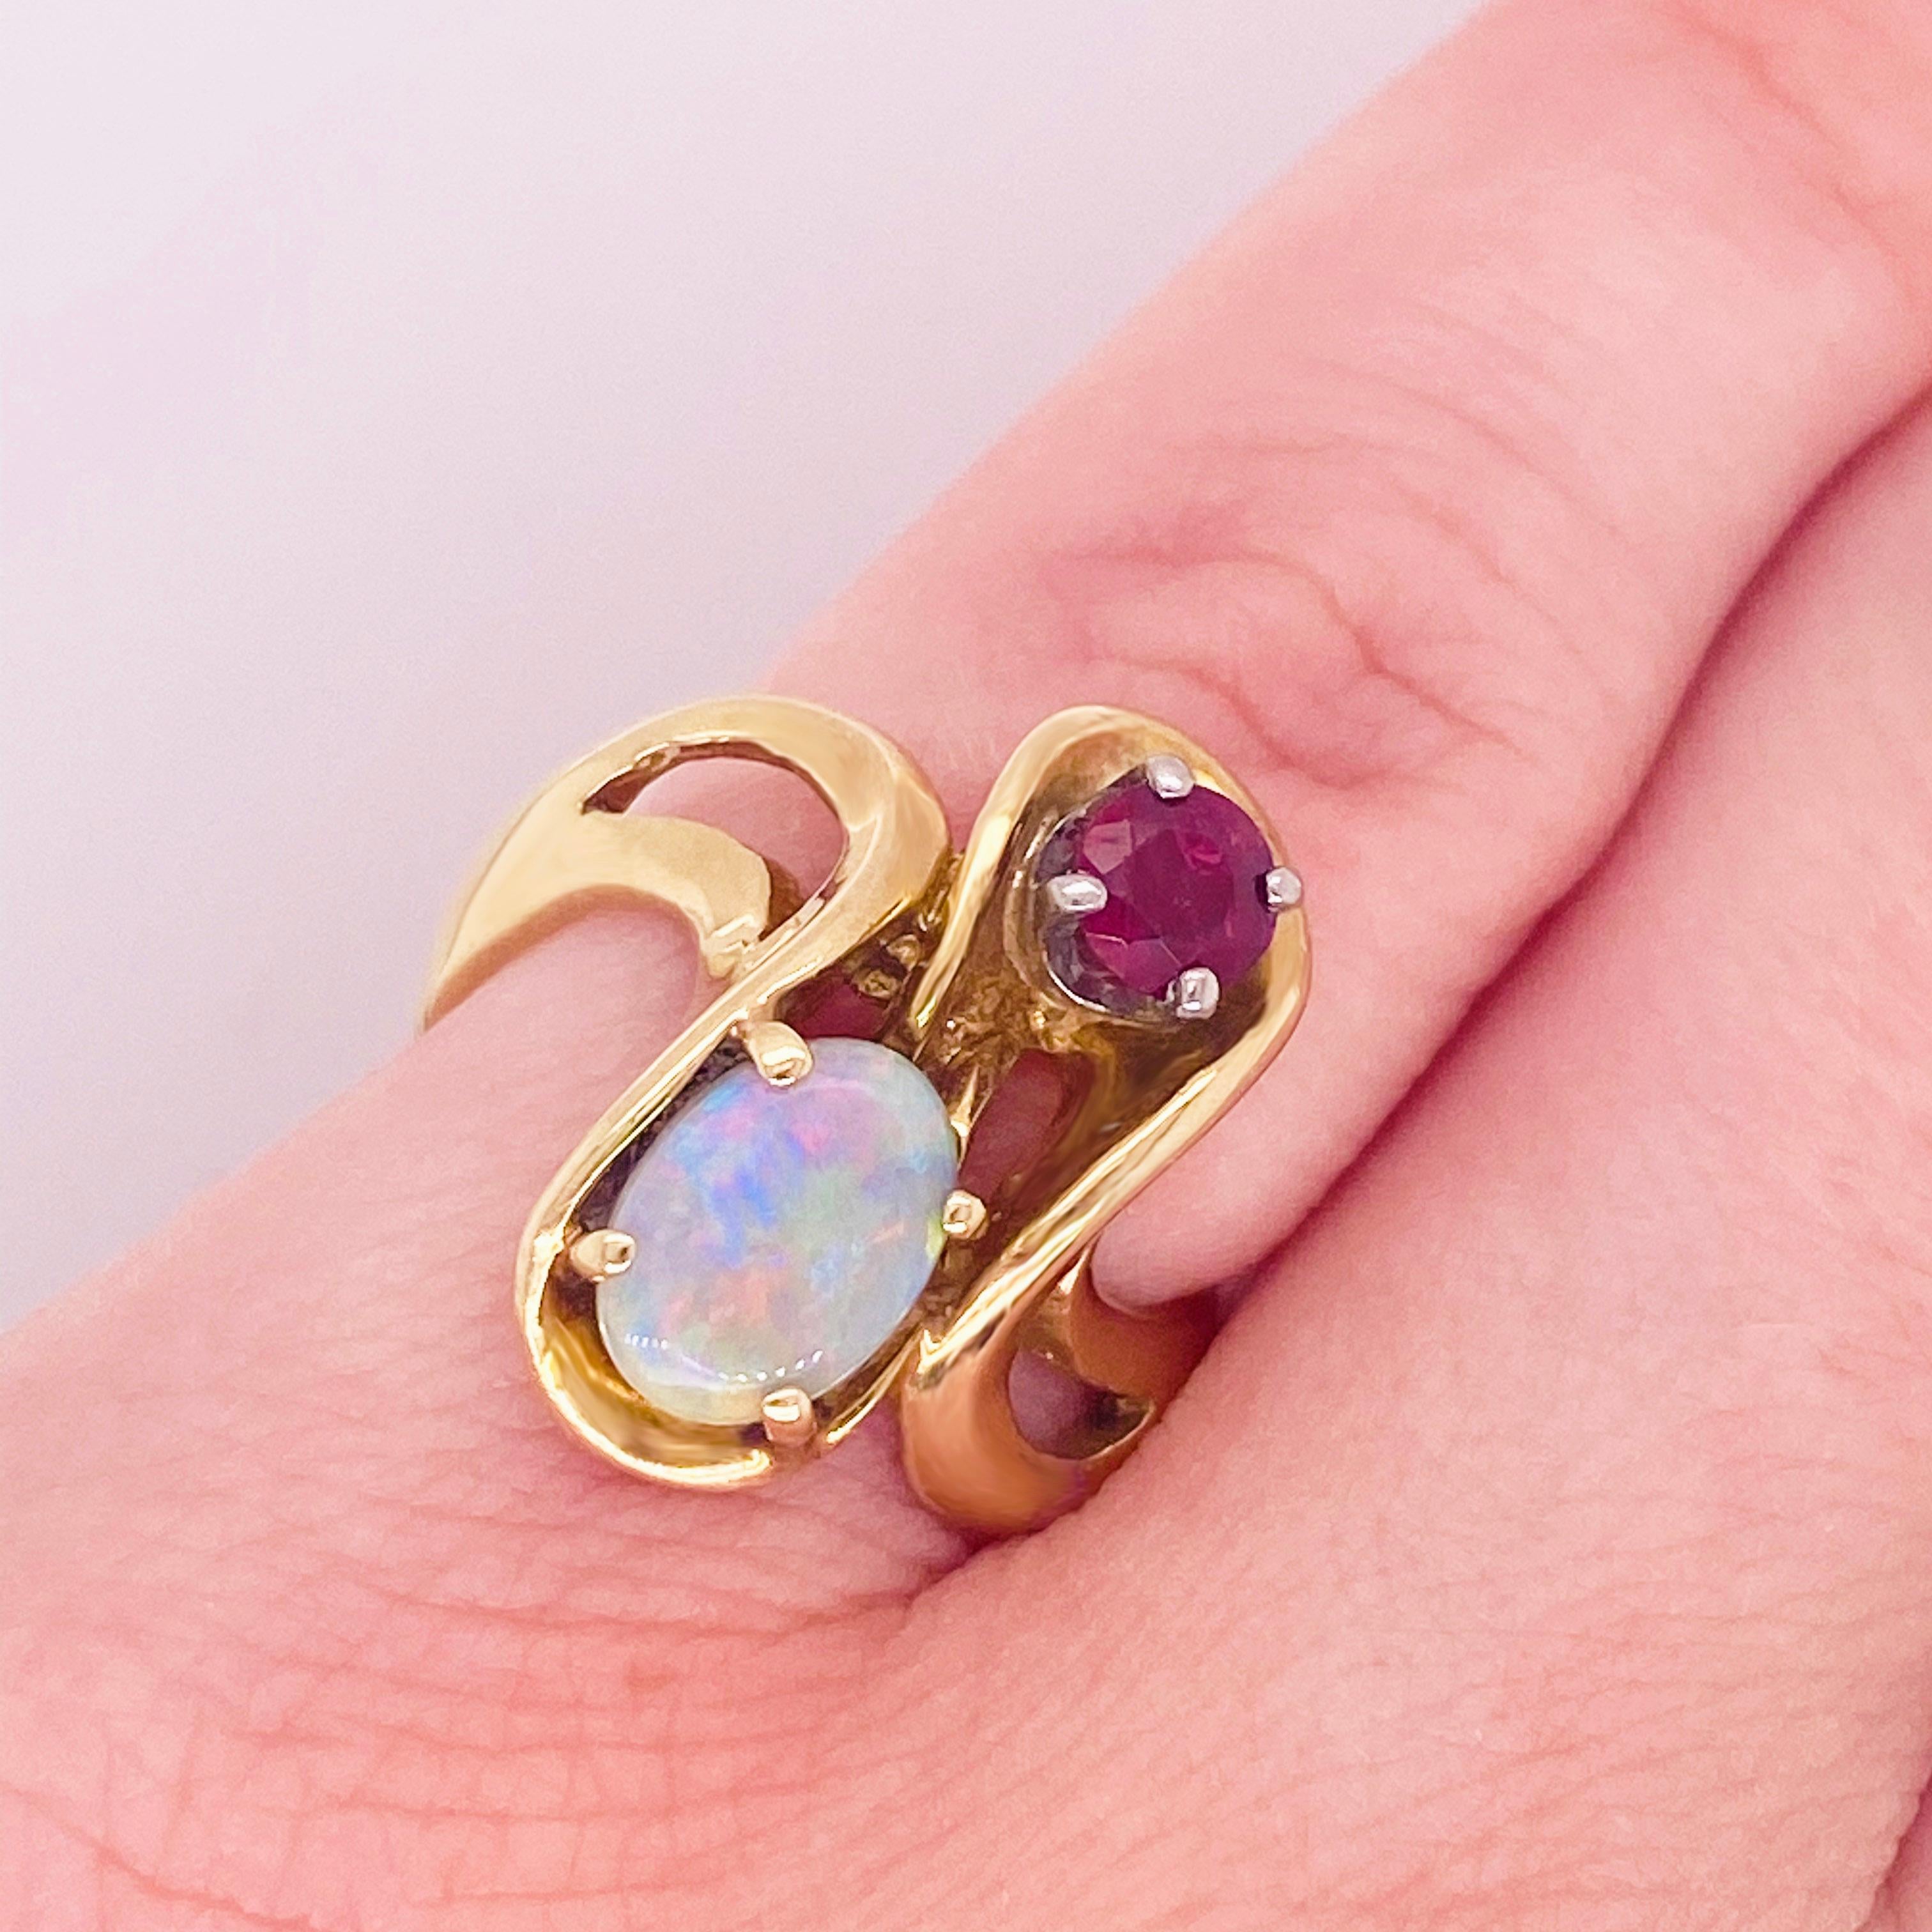 This elegant one of a kind freeform ring will make the perfect gift for your loved one or yourself! 
Opal is unique among gems, as it displays an array of very brilliant miniature rainbow iridescent effects. Opal is also the birthstone of October